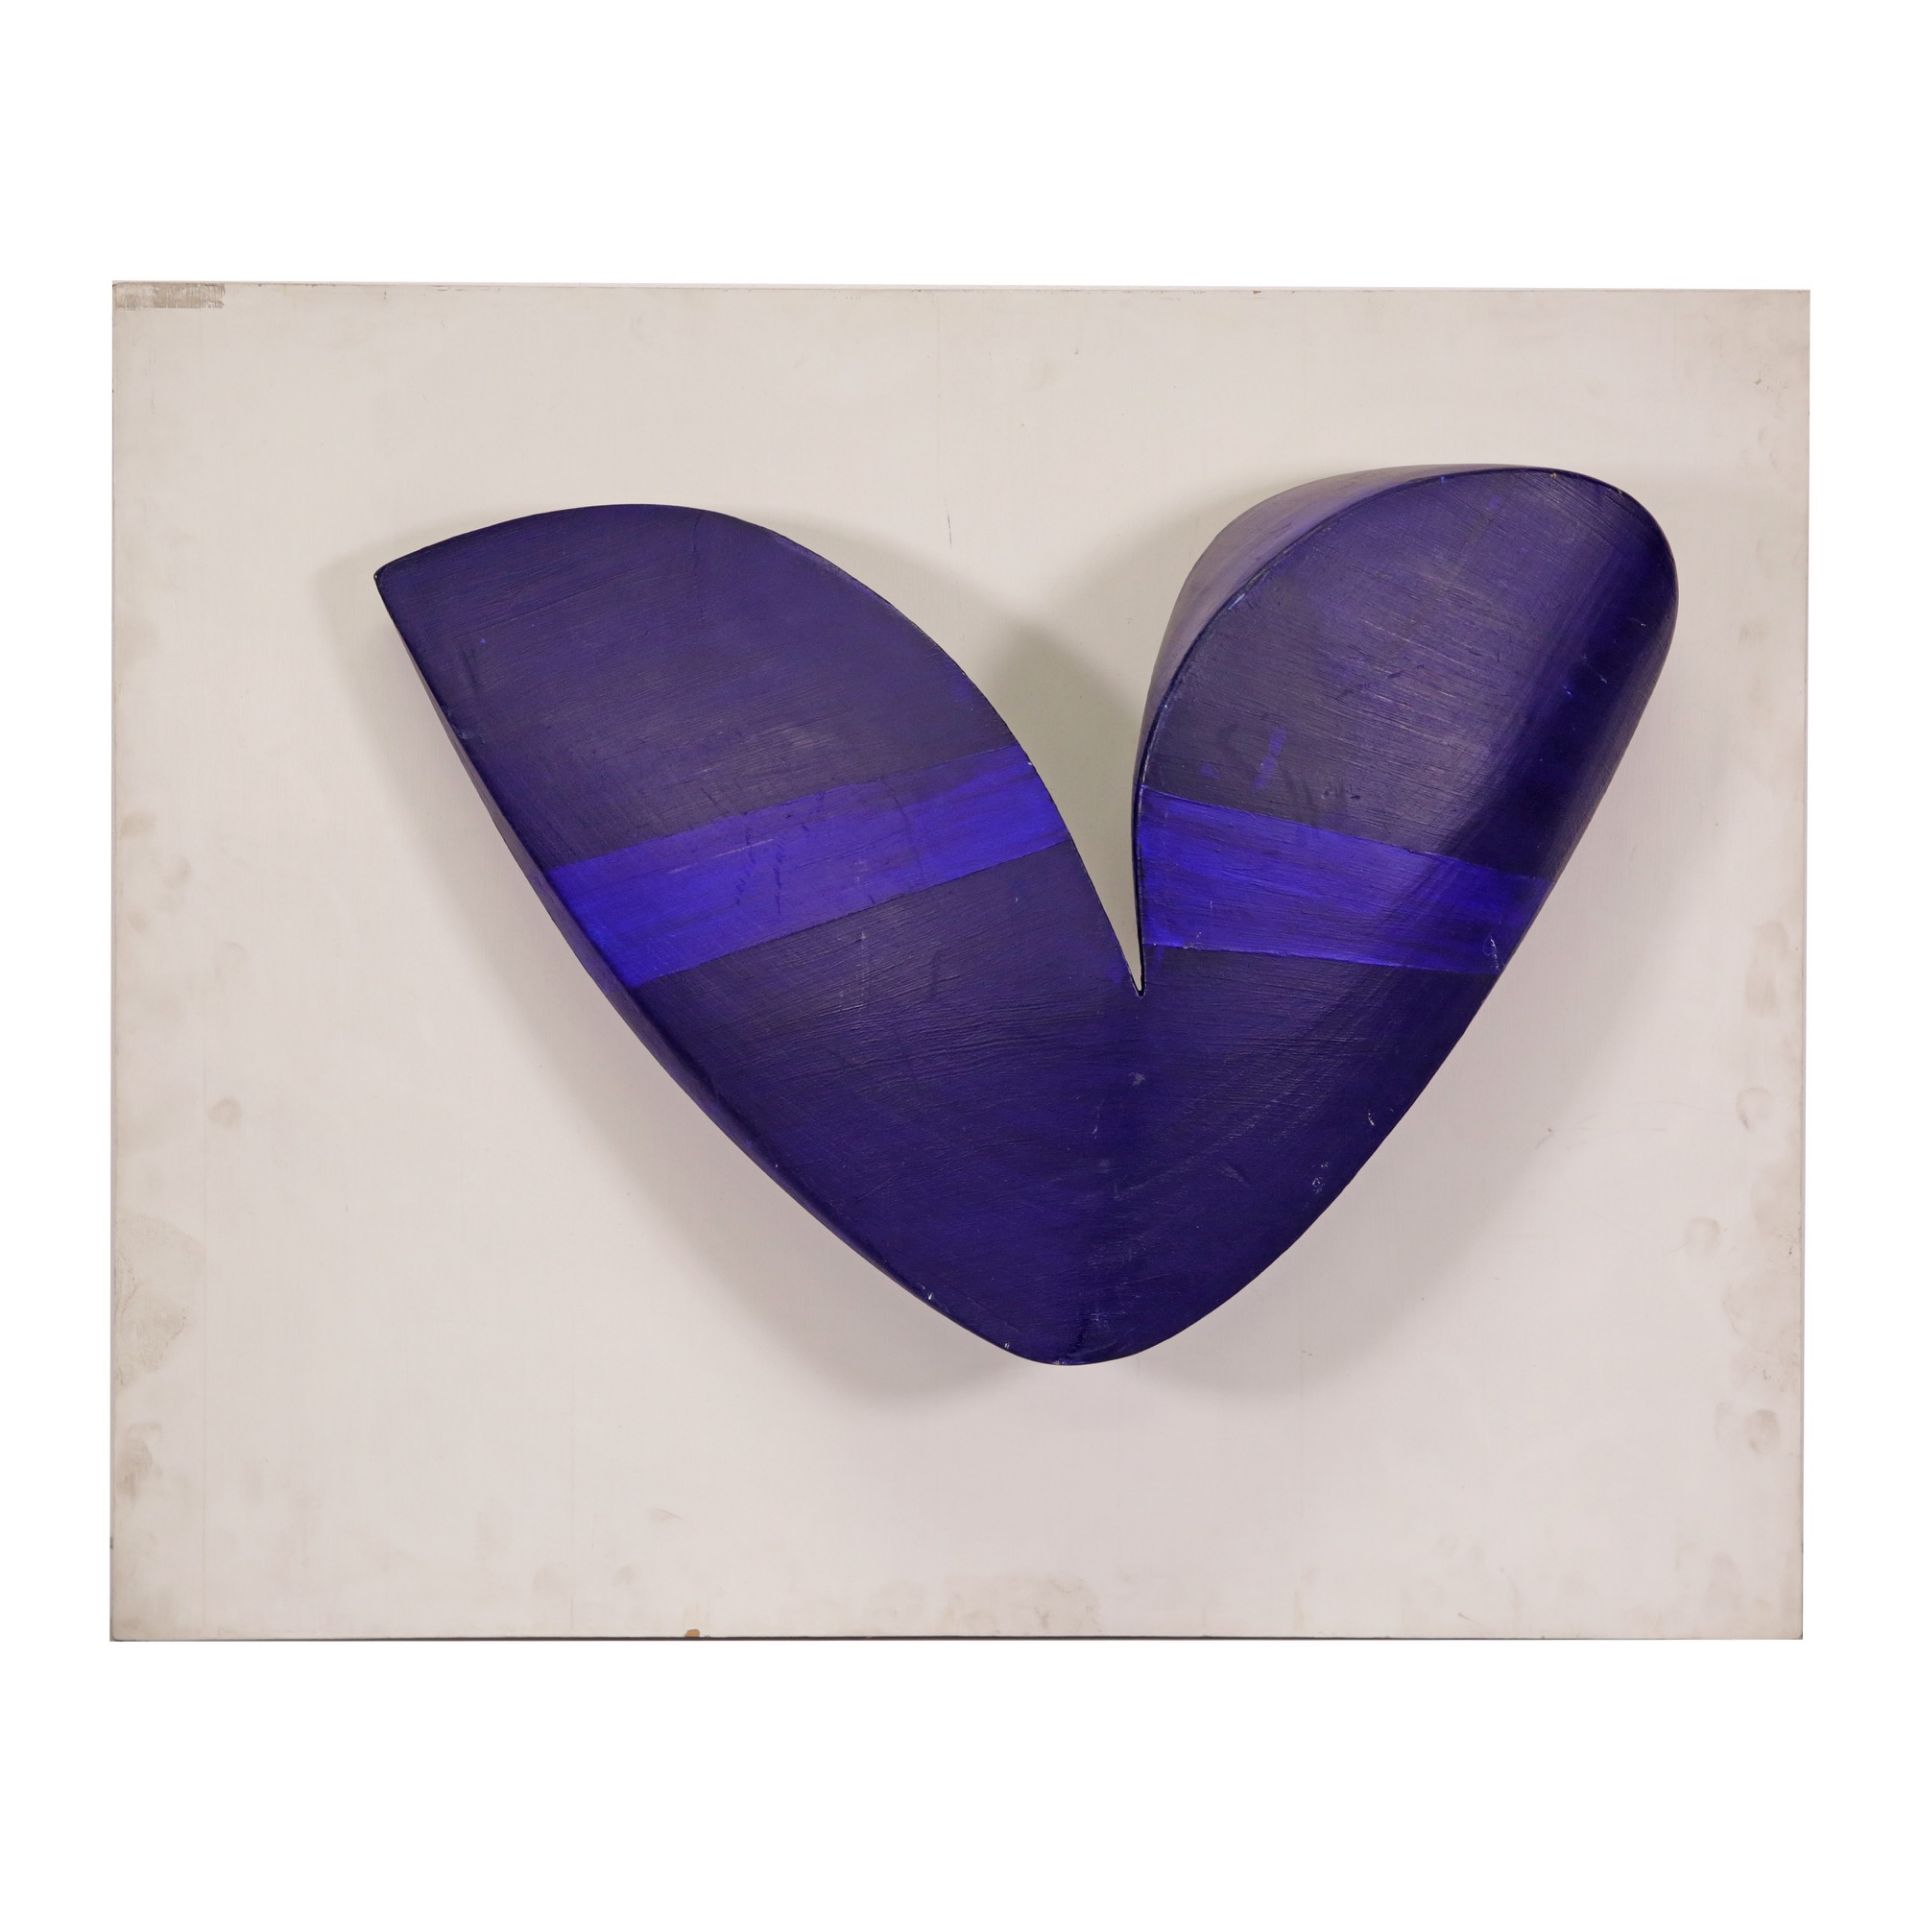 "Blue heart", French art of the 20th century, atelier"s stamp on the back. "Michel Berard Ateler"